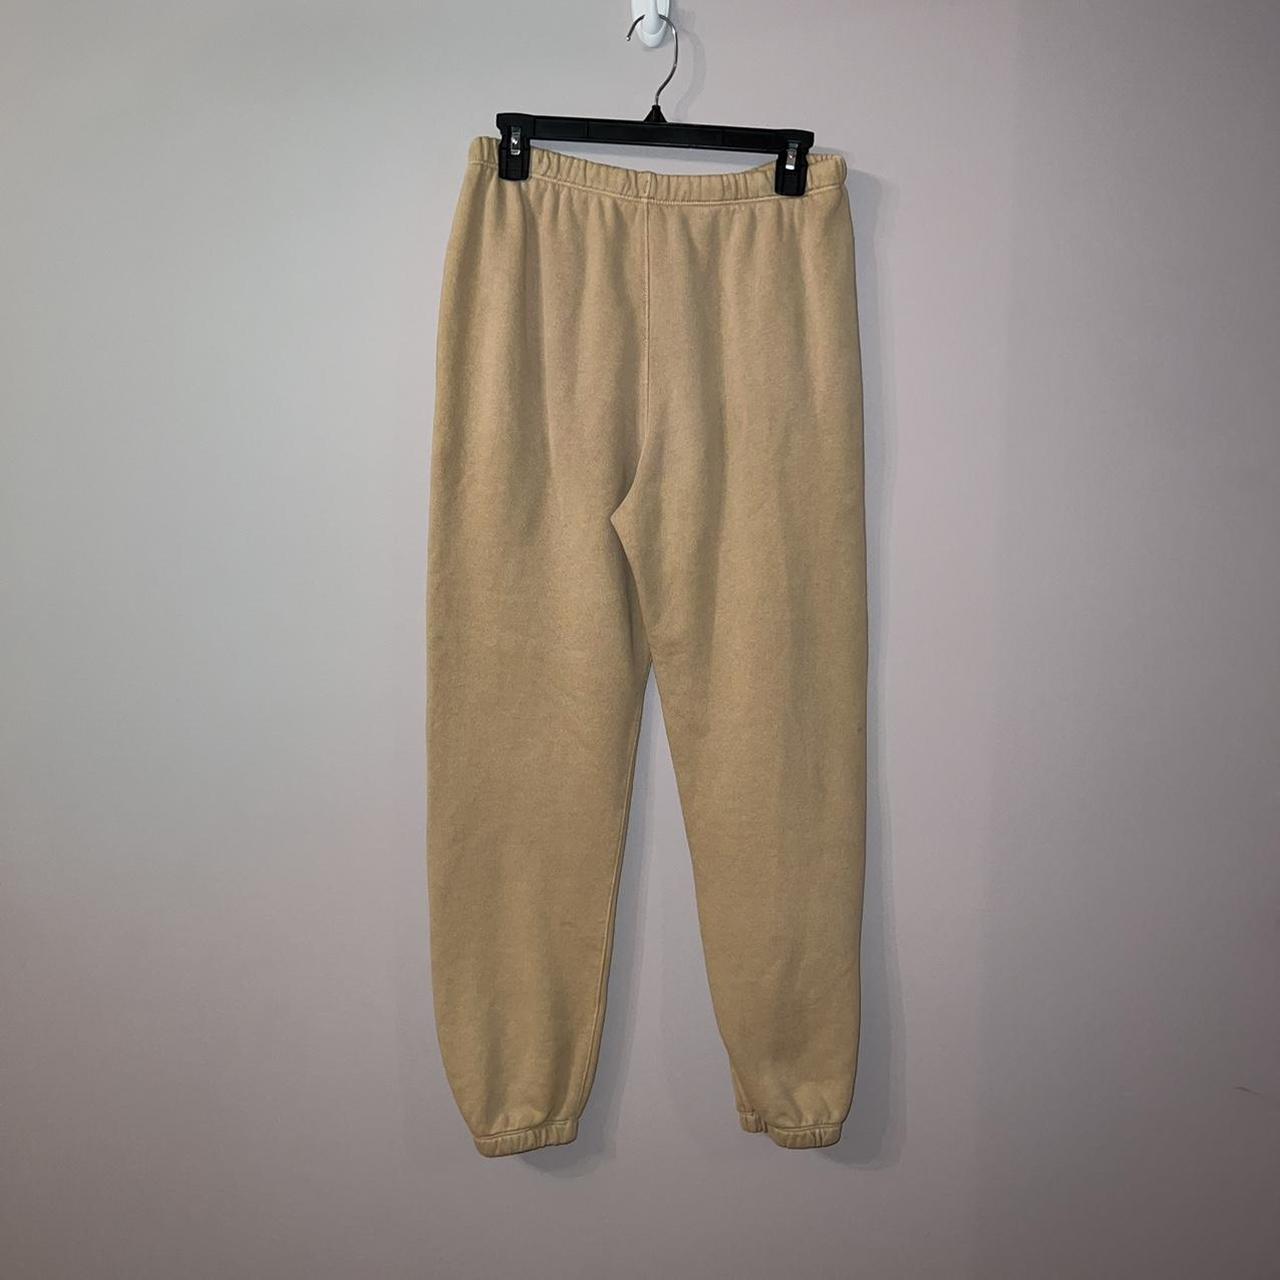 Product Image 3 - New RE/DONE x Hanes Classic